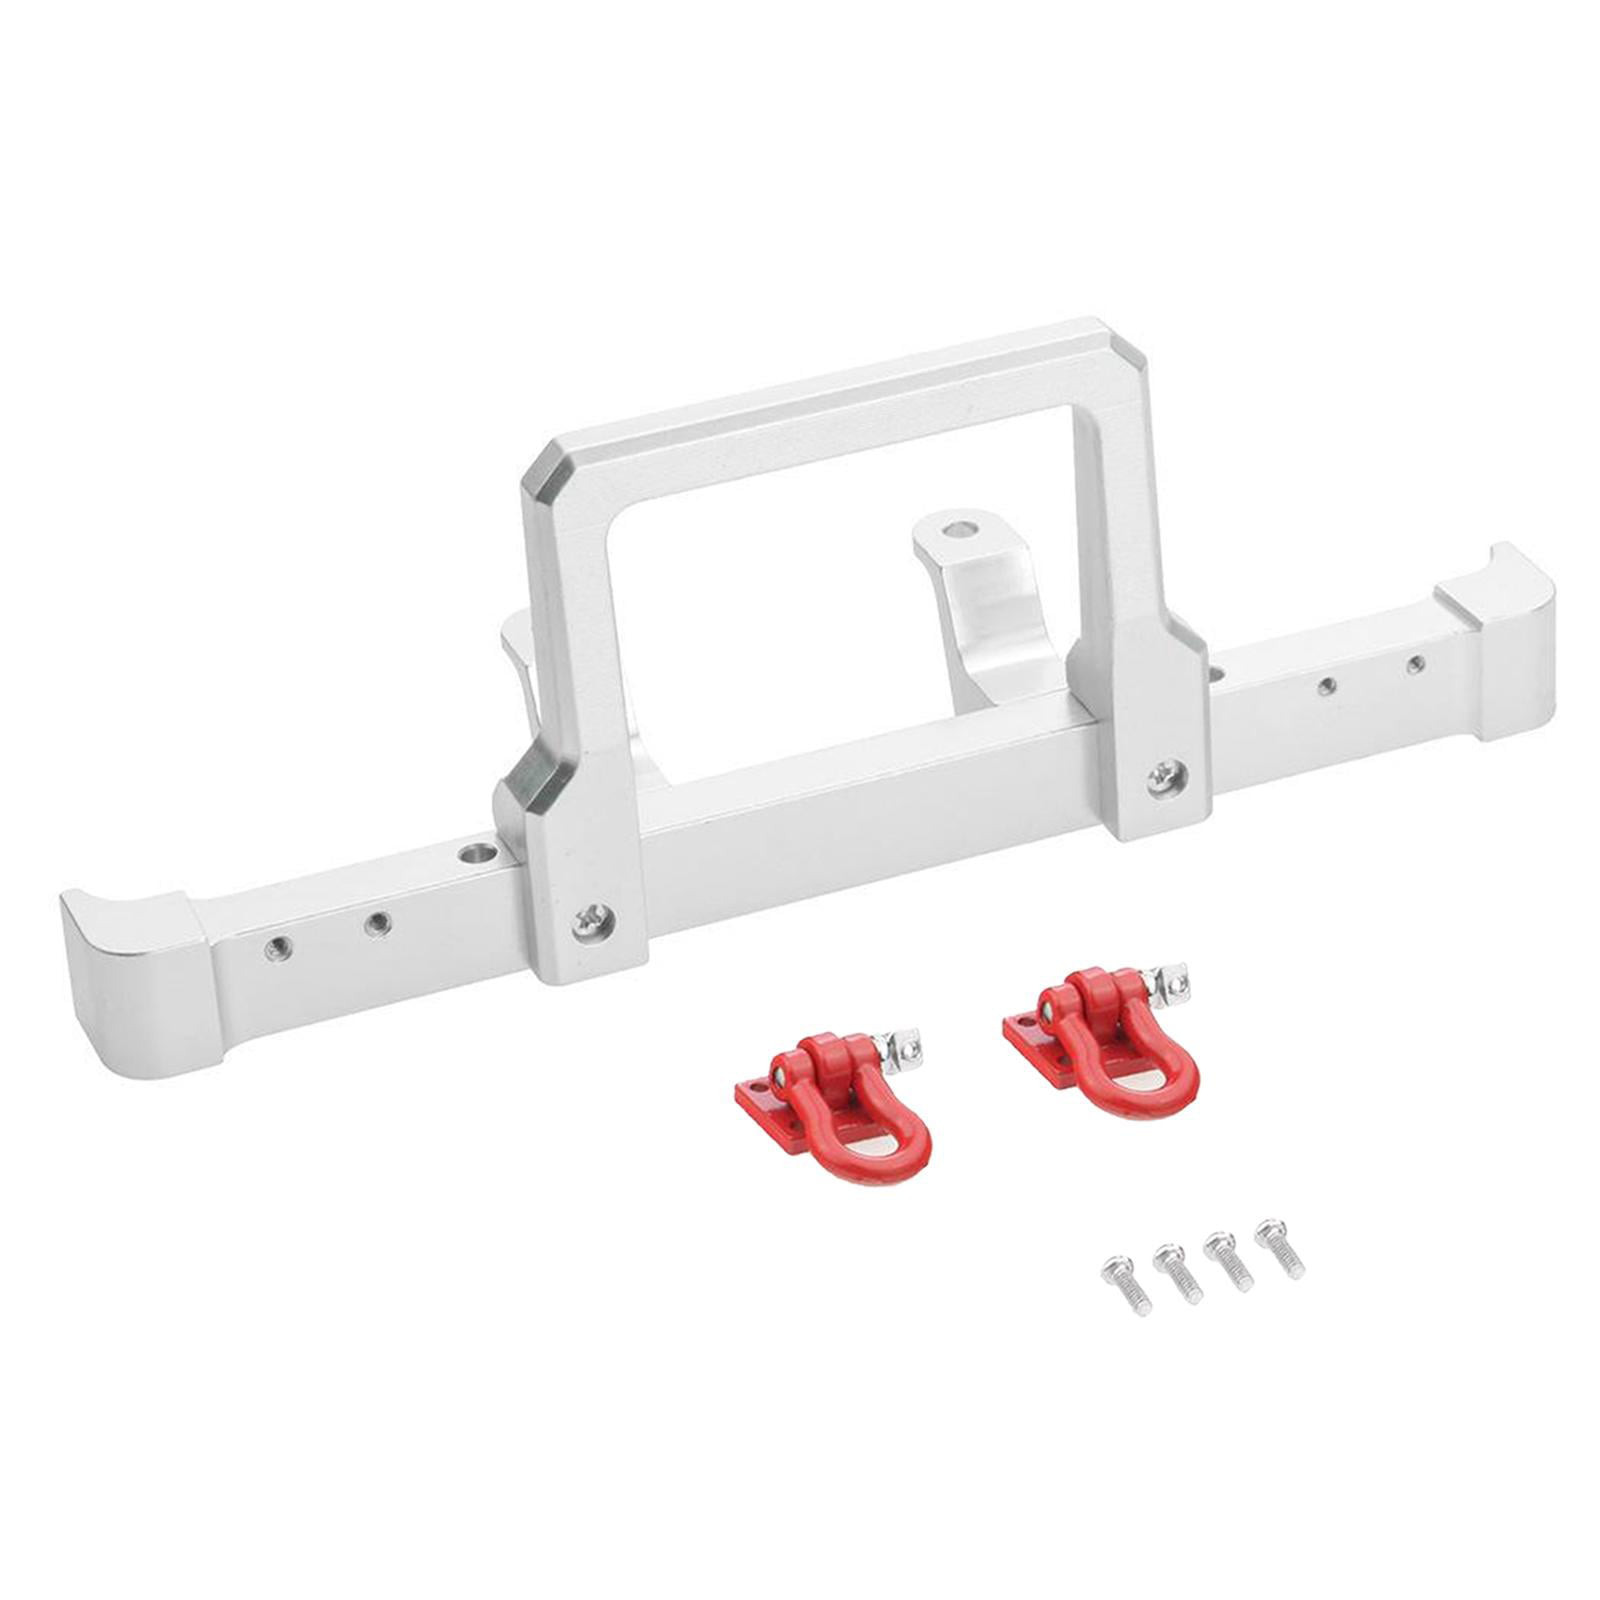 RC Front Bumper 1/12 Scale RC Car Bull Bar Mount for MN D90 99S Defender RC Car